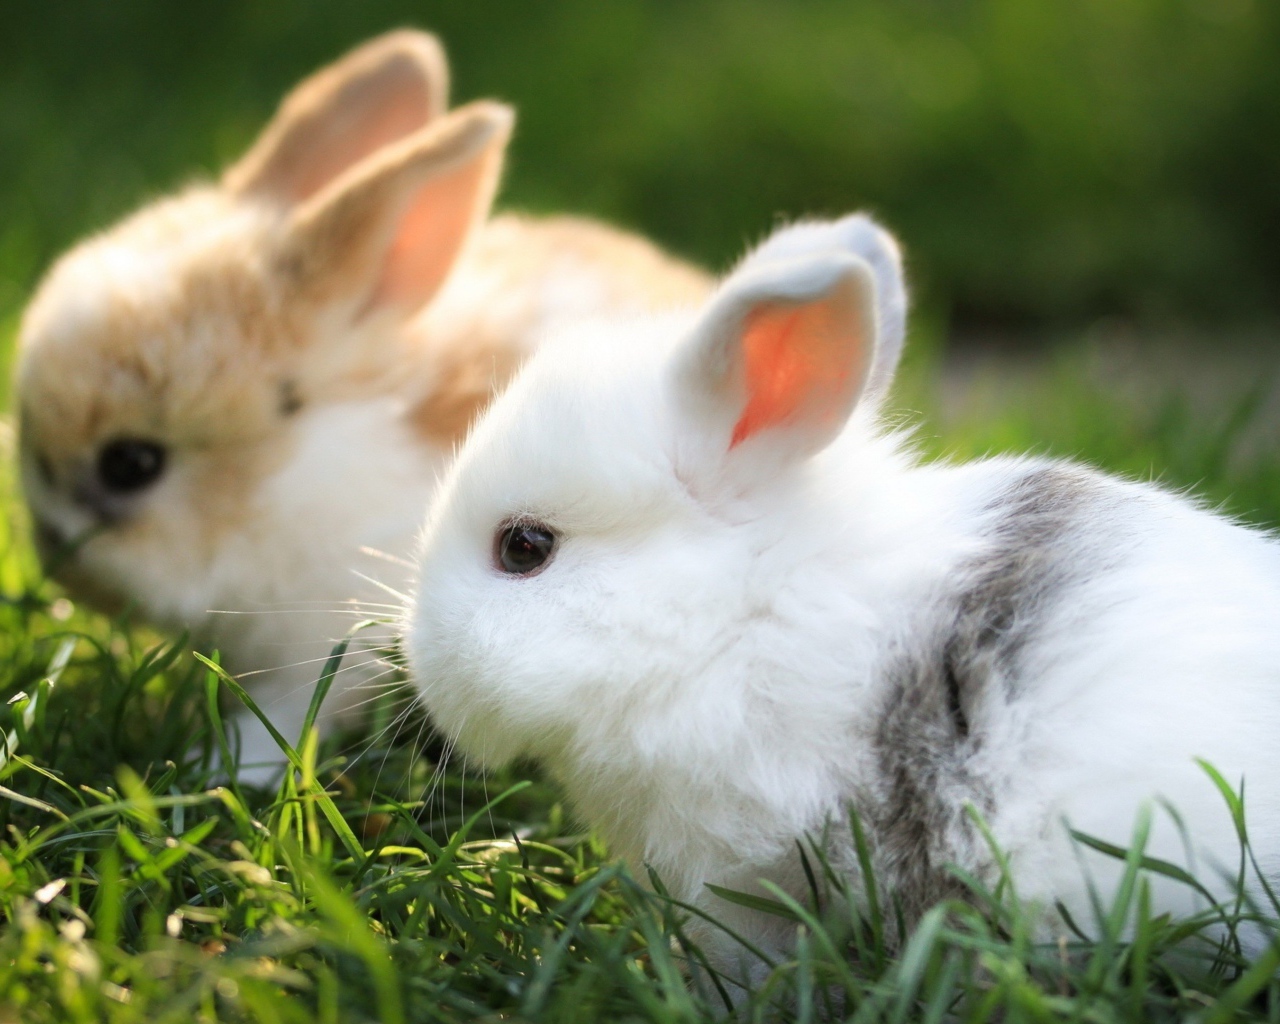 Two little decorative rabbits are sitting in the green grass